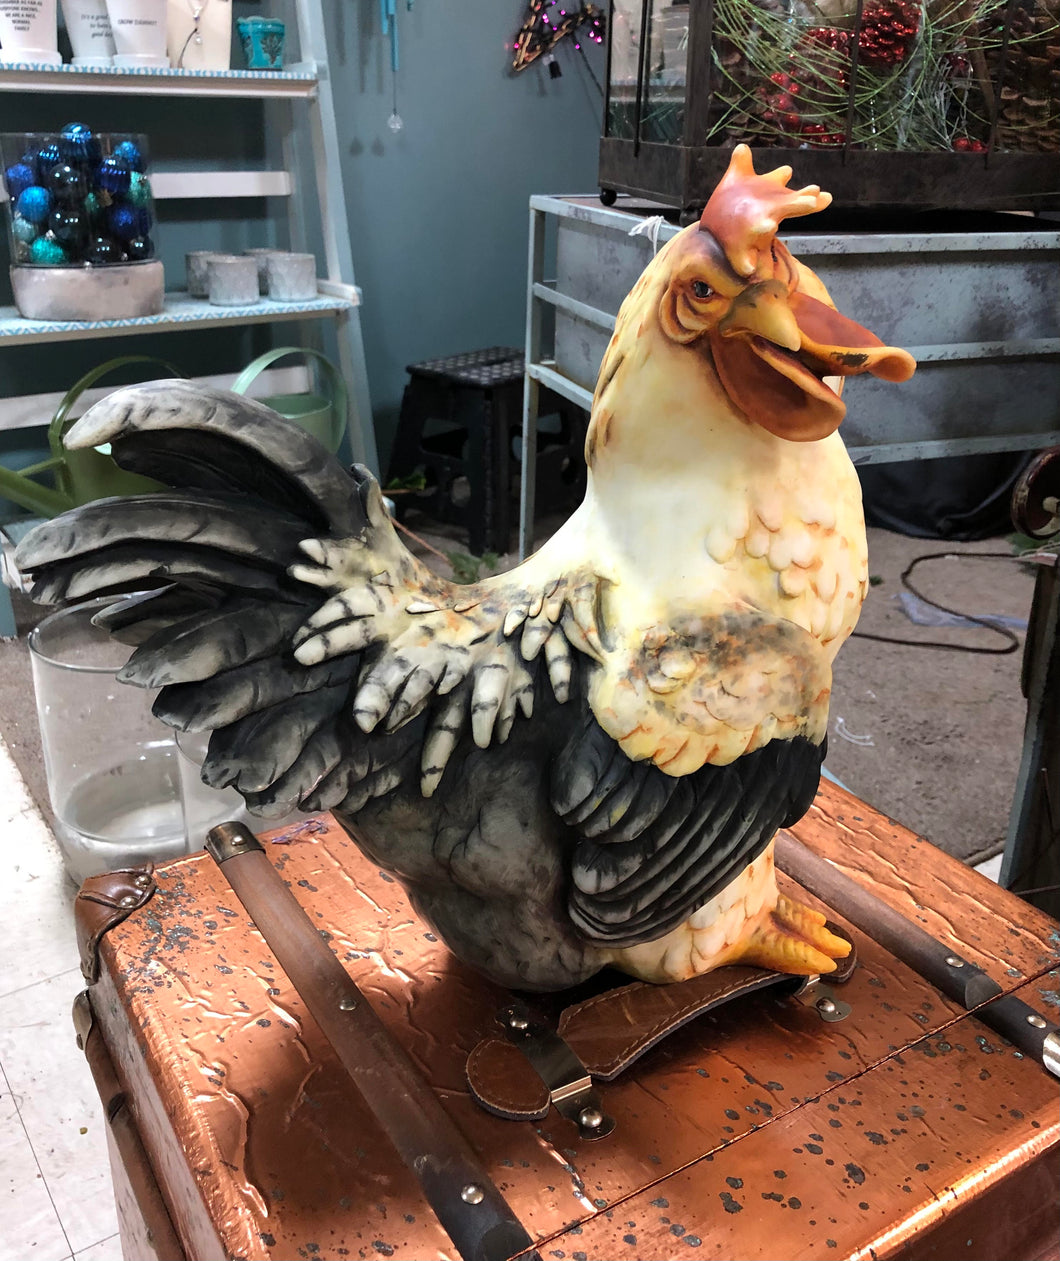 FABIO, RESIN ROOSTER STRUTTING HIS STUFF | A MUST-HAVE OF THIS SILKY SMOOTH ROOSTER | GOLDEN-ORANGE COMB AND WATTLE | YELLOW BEAK AND AROUND HIS EYES | TA UPPER BODY, CHEST, AND LEG FEATHERS | BLACK WINGS, BACKSIDE, AND TAIL FEATHERS | BRIGHT YELLOW-ORANGE FEET.